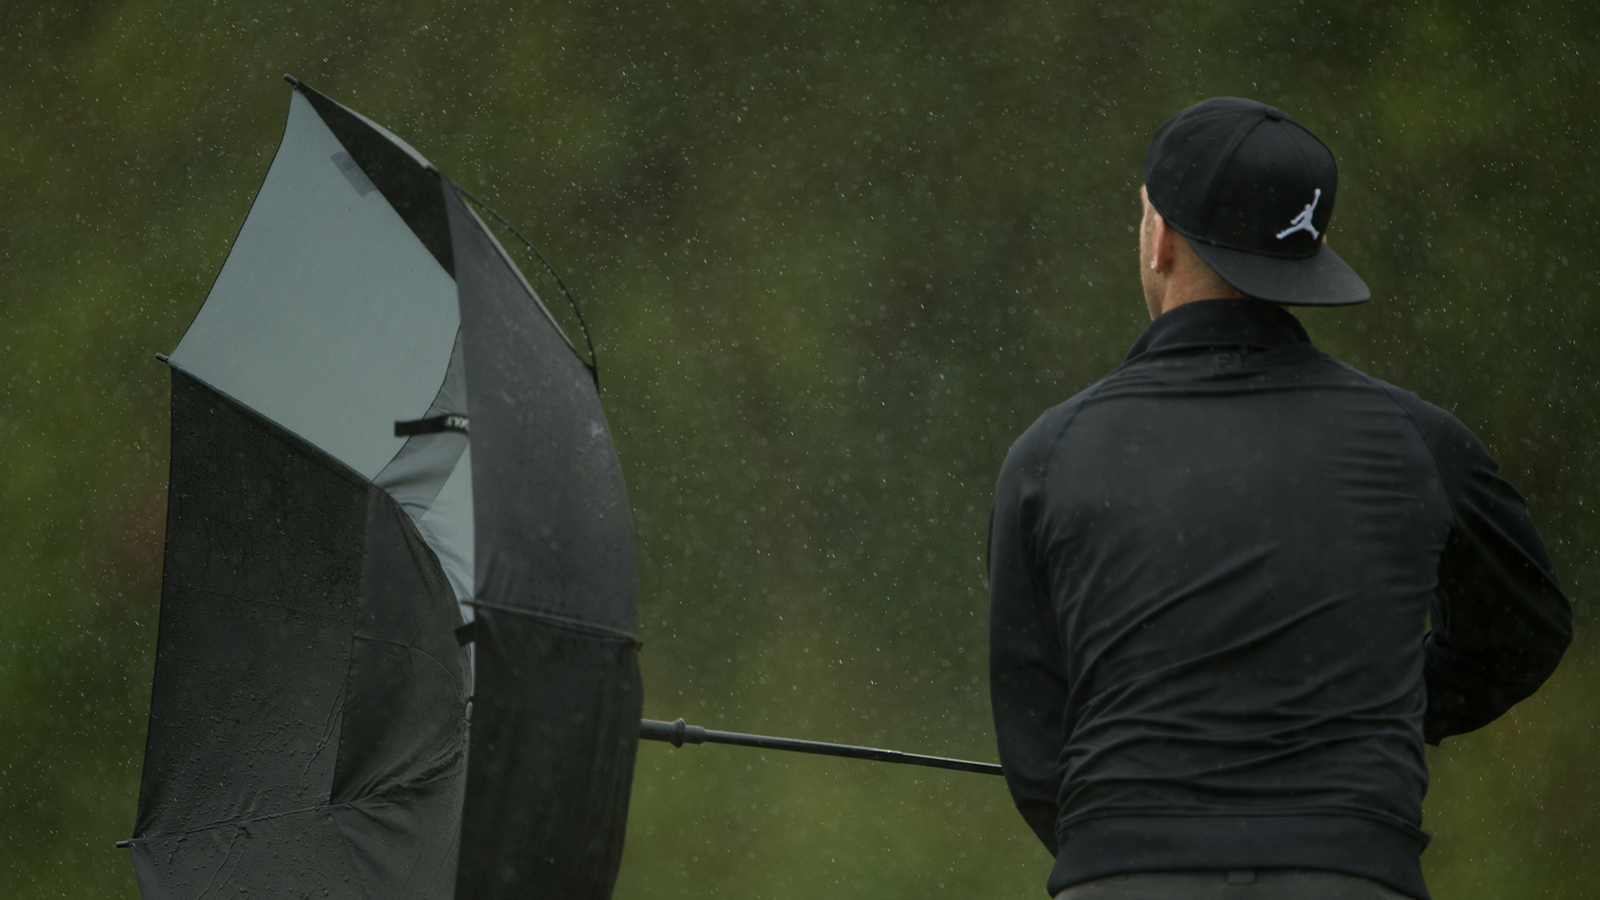 Derek Berg fixes his umbrella on the 12th green during Final Round of the 41st National Car Rental Assistant PGA Professional Championship.